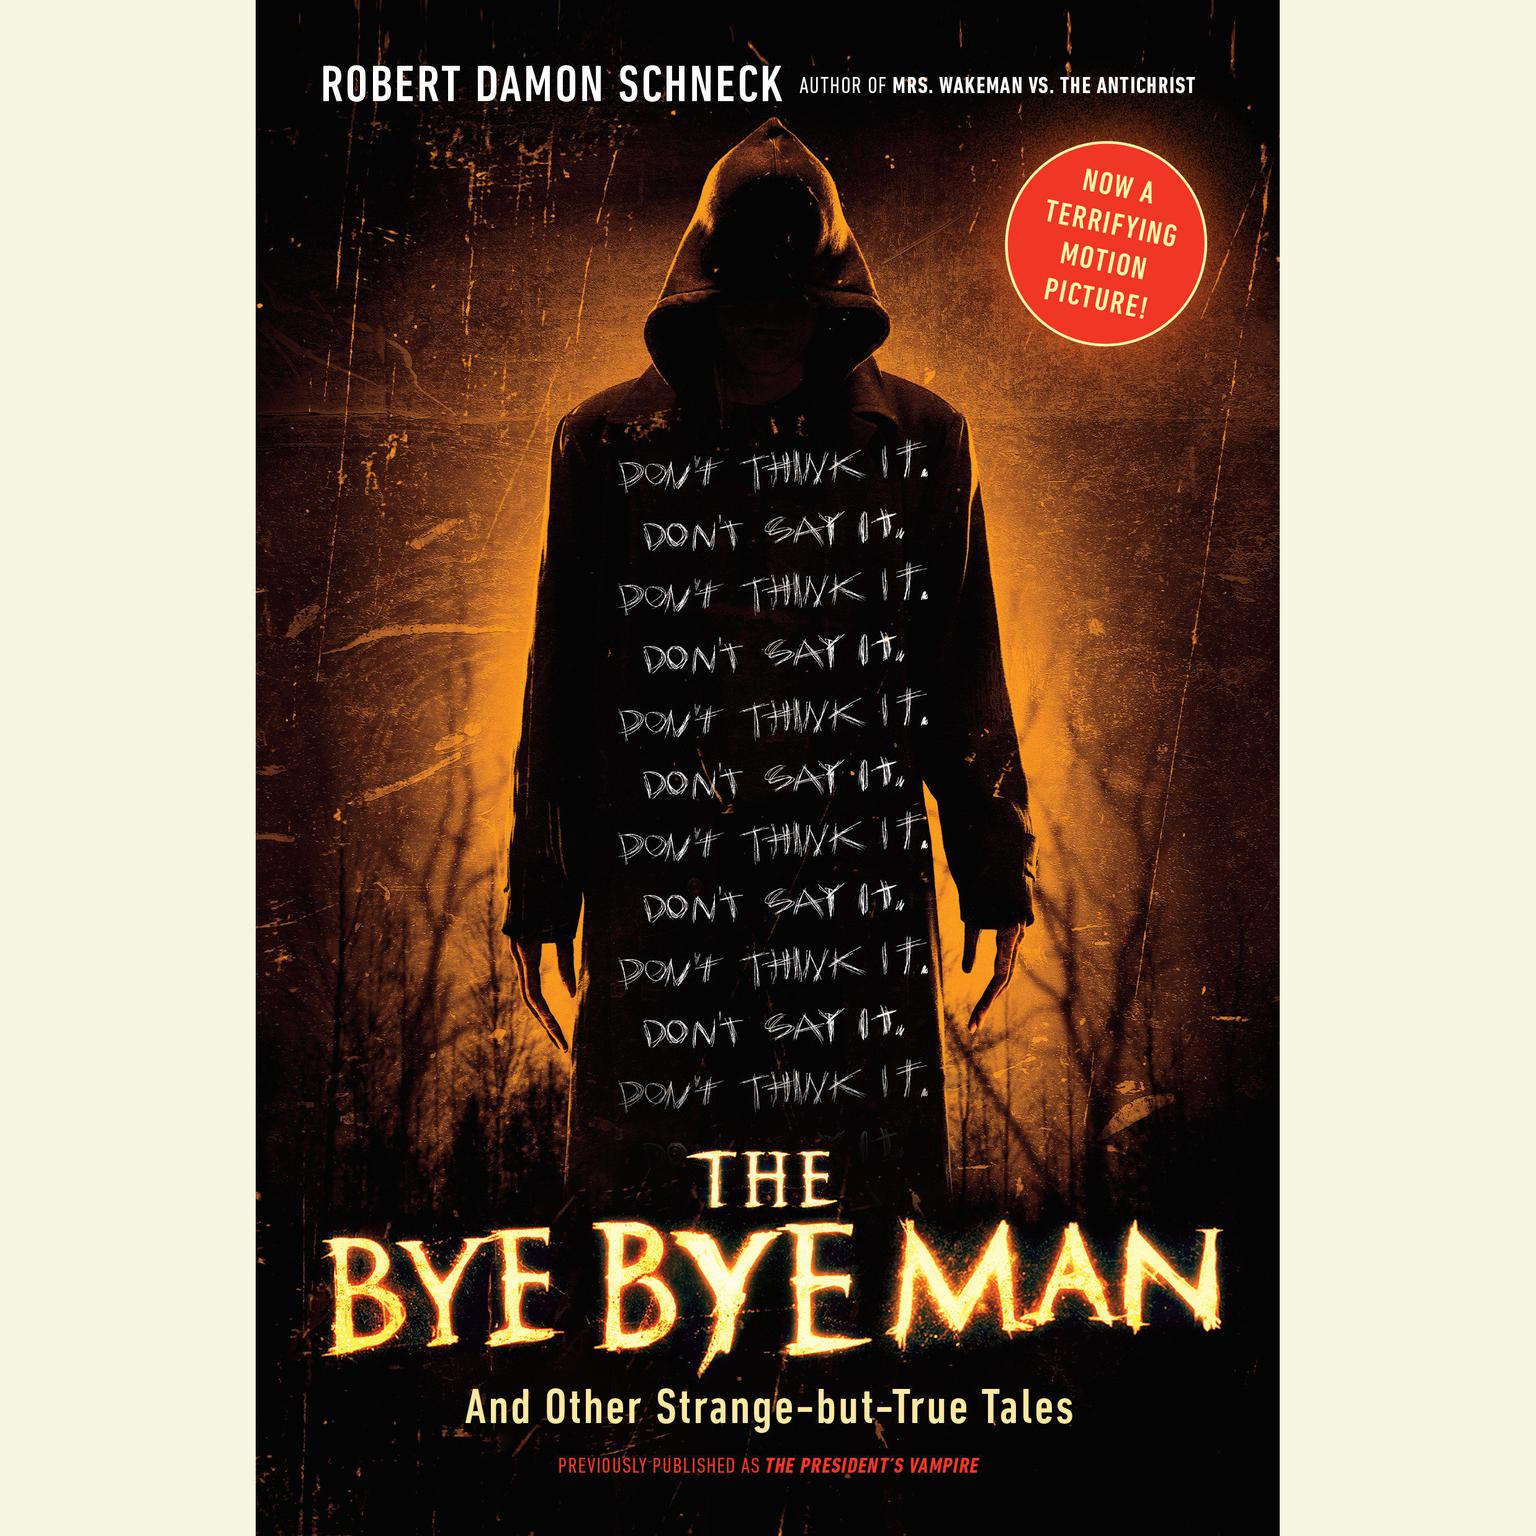 The Bye Bye Man: And Other Strange-but-True Tales Audiobook, by Robert Damon Schneck